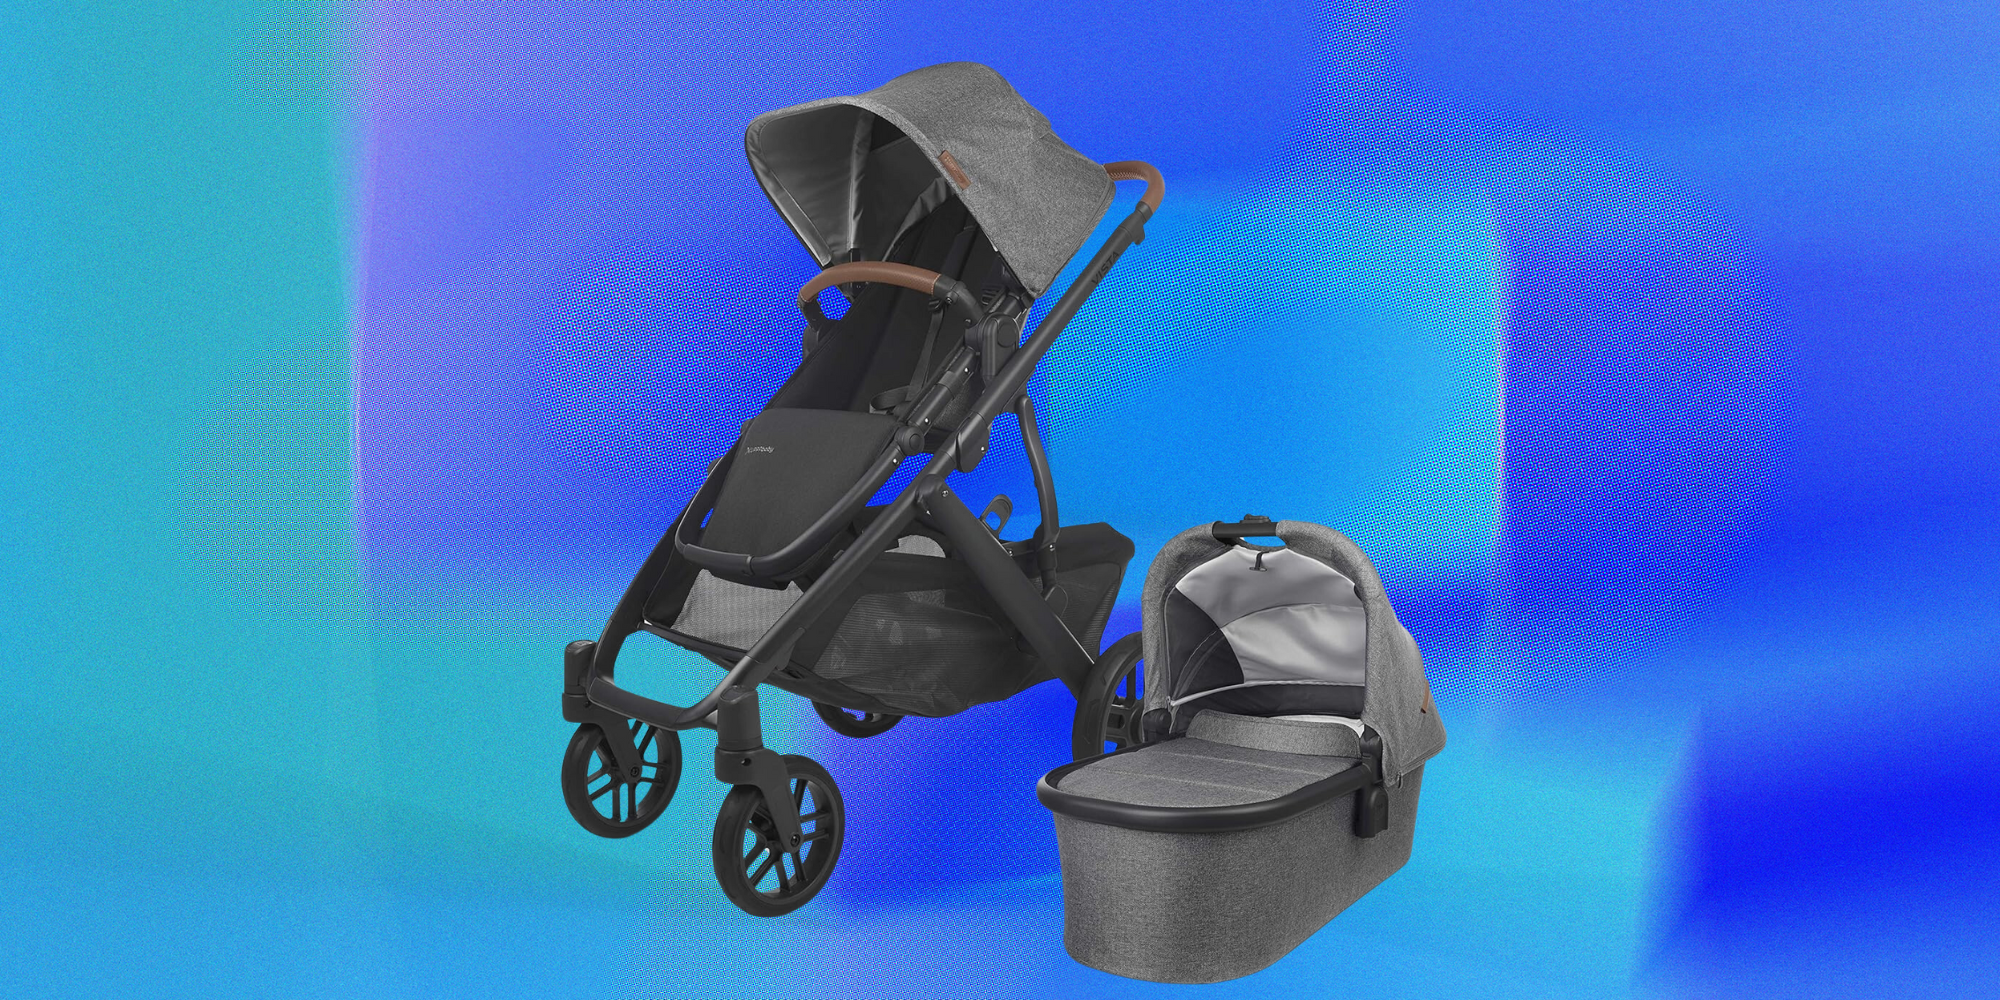 <p>Your baby stroller is an important purchase. It can be an expensive set of wheels, it will live between your home and car for years and you'll be loading your child in and out of it most every day. To narrow your choices, think carefully about what you want from a stroller. Are you a new parent seeking a newborn-ready <a href="https://www.goodhousekeeping.com/childrens-products/g38902453/best-stroller-car-seat-combos/">car seat stroller combo</a>? Or is your baby now a toddler and you're ready for a <a href="https://www.goodhousekeeping.com/childrens-products/baby-stroller-reviews/g31782776/best-lightweight-strollers/">lightweight stroller</a>? Are you hunting the perfect <a href="https://www.goodhousekeeping.com/childrens-products/baby-stroller-reviews/g43499176/best-travel-strollers/">travel stroller</a> for Disney World or other vacation? </p><p>At the <a href="https://www.goodhousekeeping.com/institute/about-the-institute/a19748212/good-housekeeping-institute-product-reviews/">Good Housekeeping Institute</a>, we've done the rigorous testing on all of these types of strollers and more. <strong>In the past five years, we've tested more than 50 stroller models in our Labs and with consumer testers</strong>, studying factors such as maneuverability, stability, ease of use and simplicity of fold. </p>